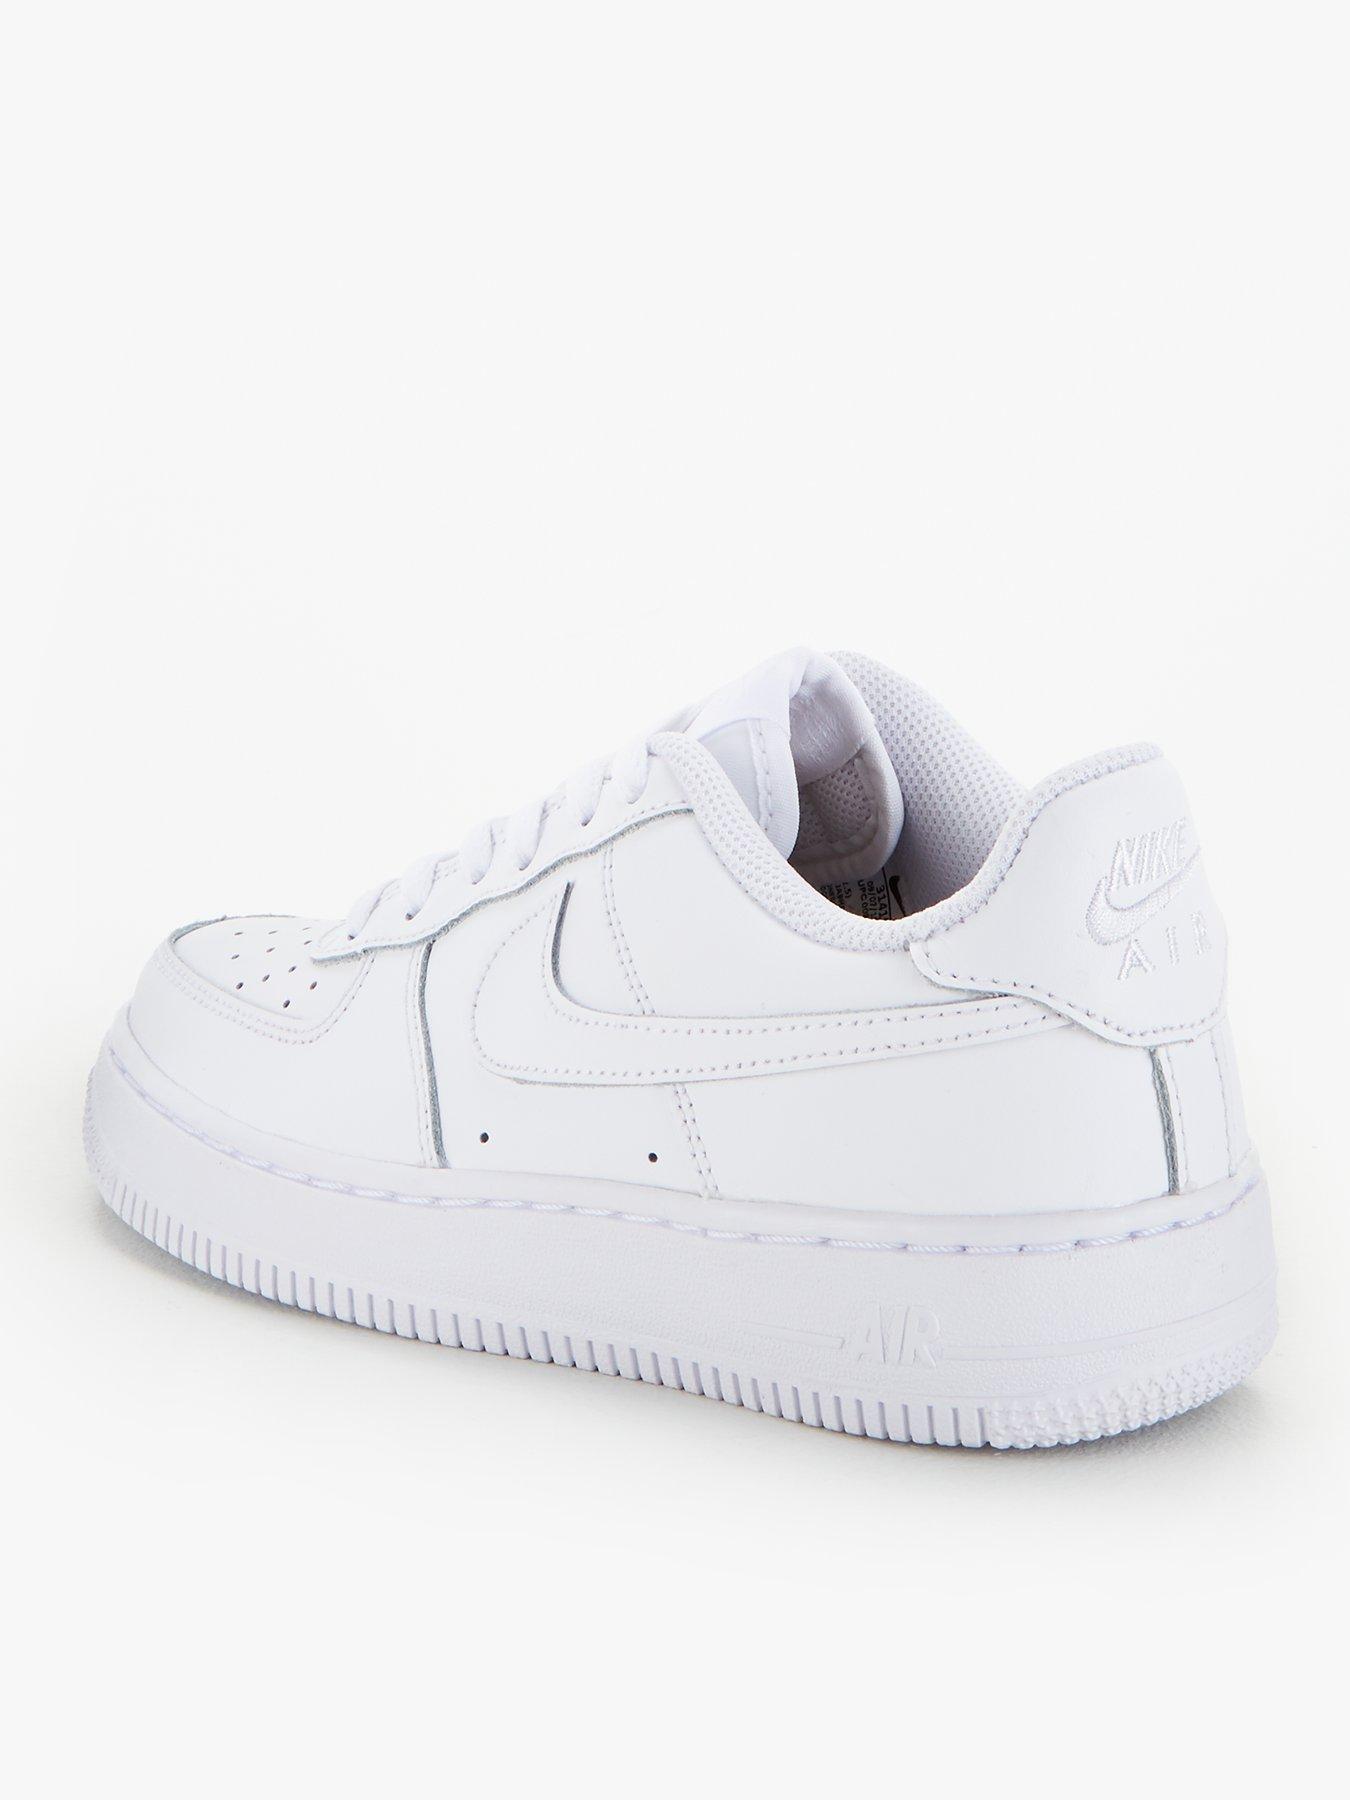 white air force junior size 4